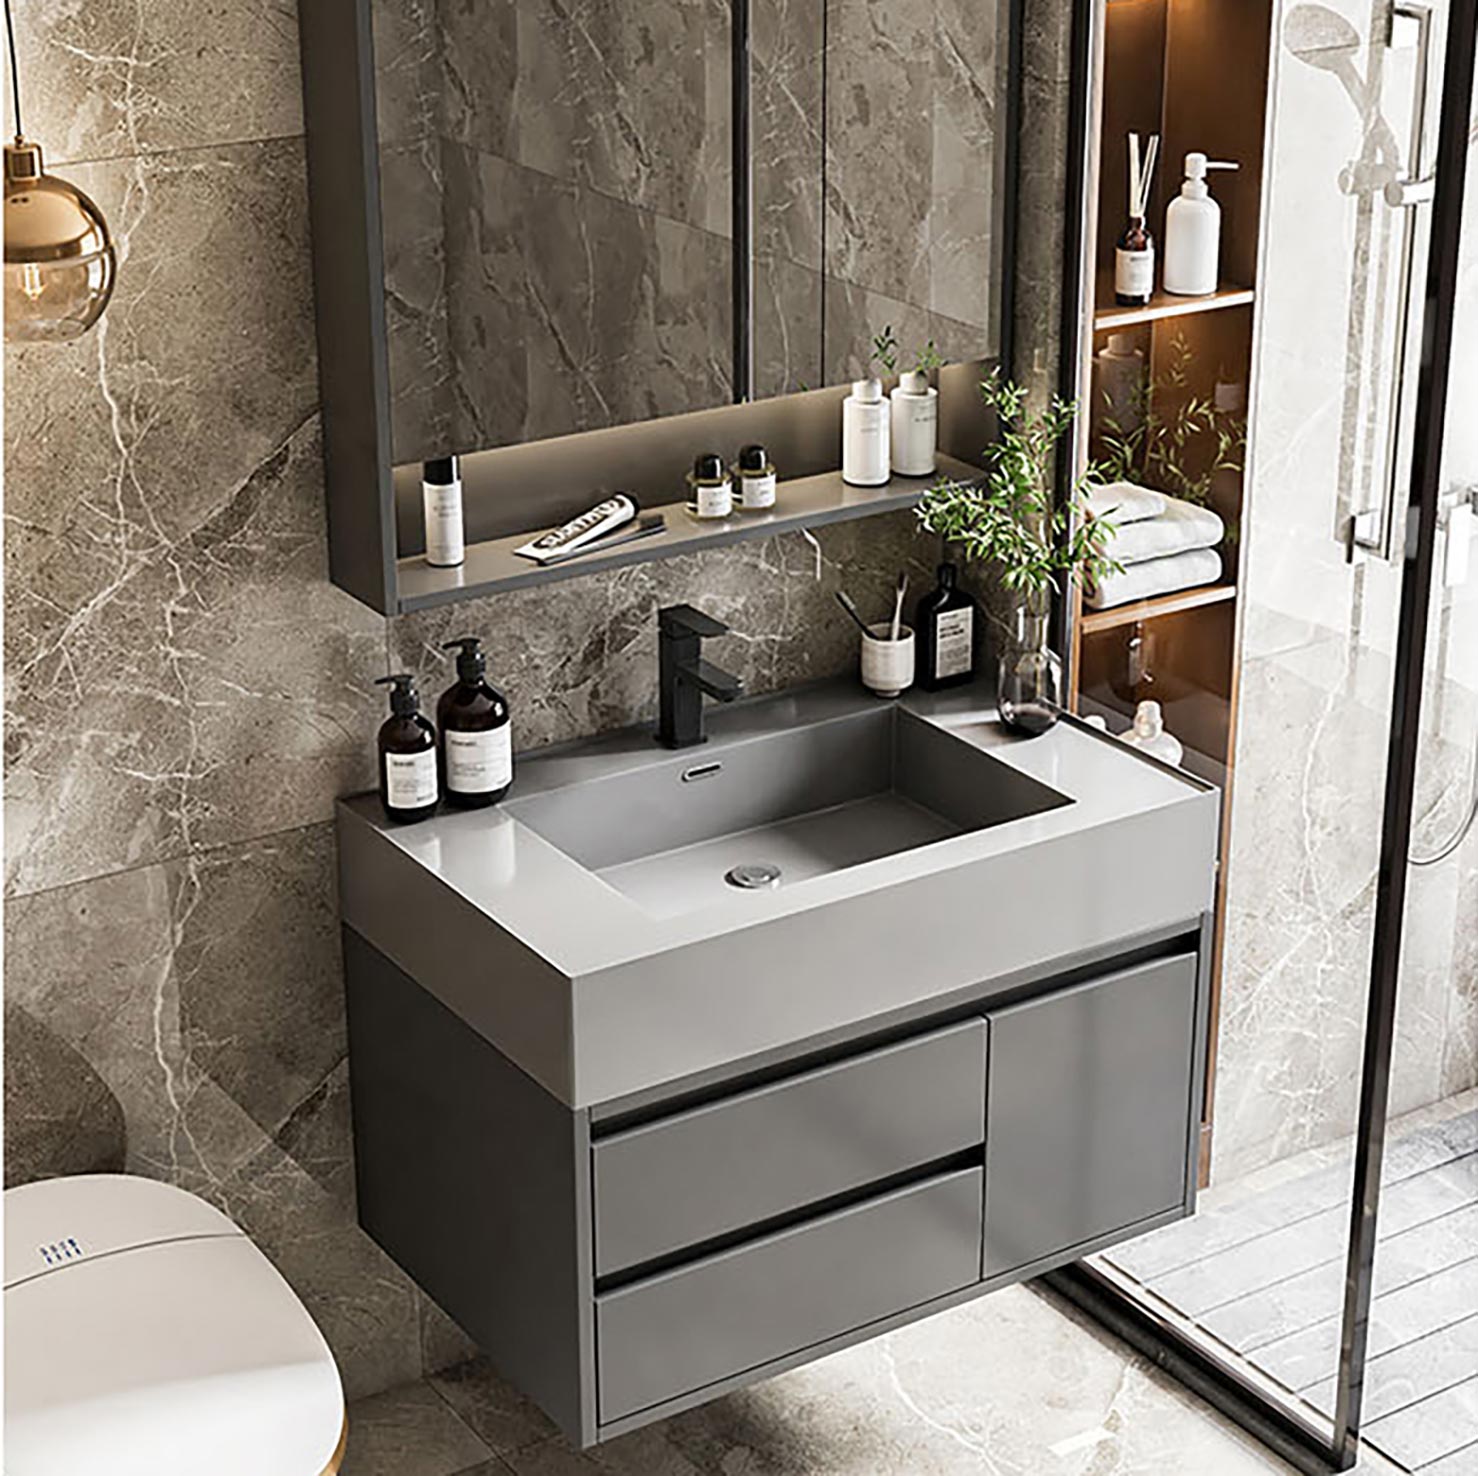 Large matte black wall-mounted bathroom cabinet 36 inches unique standing american bathroom vanity set (19)